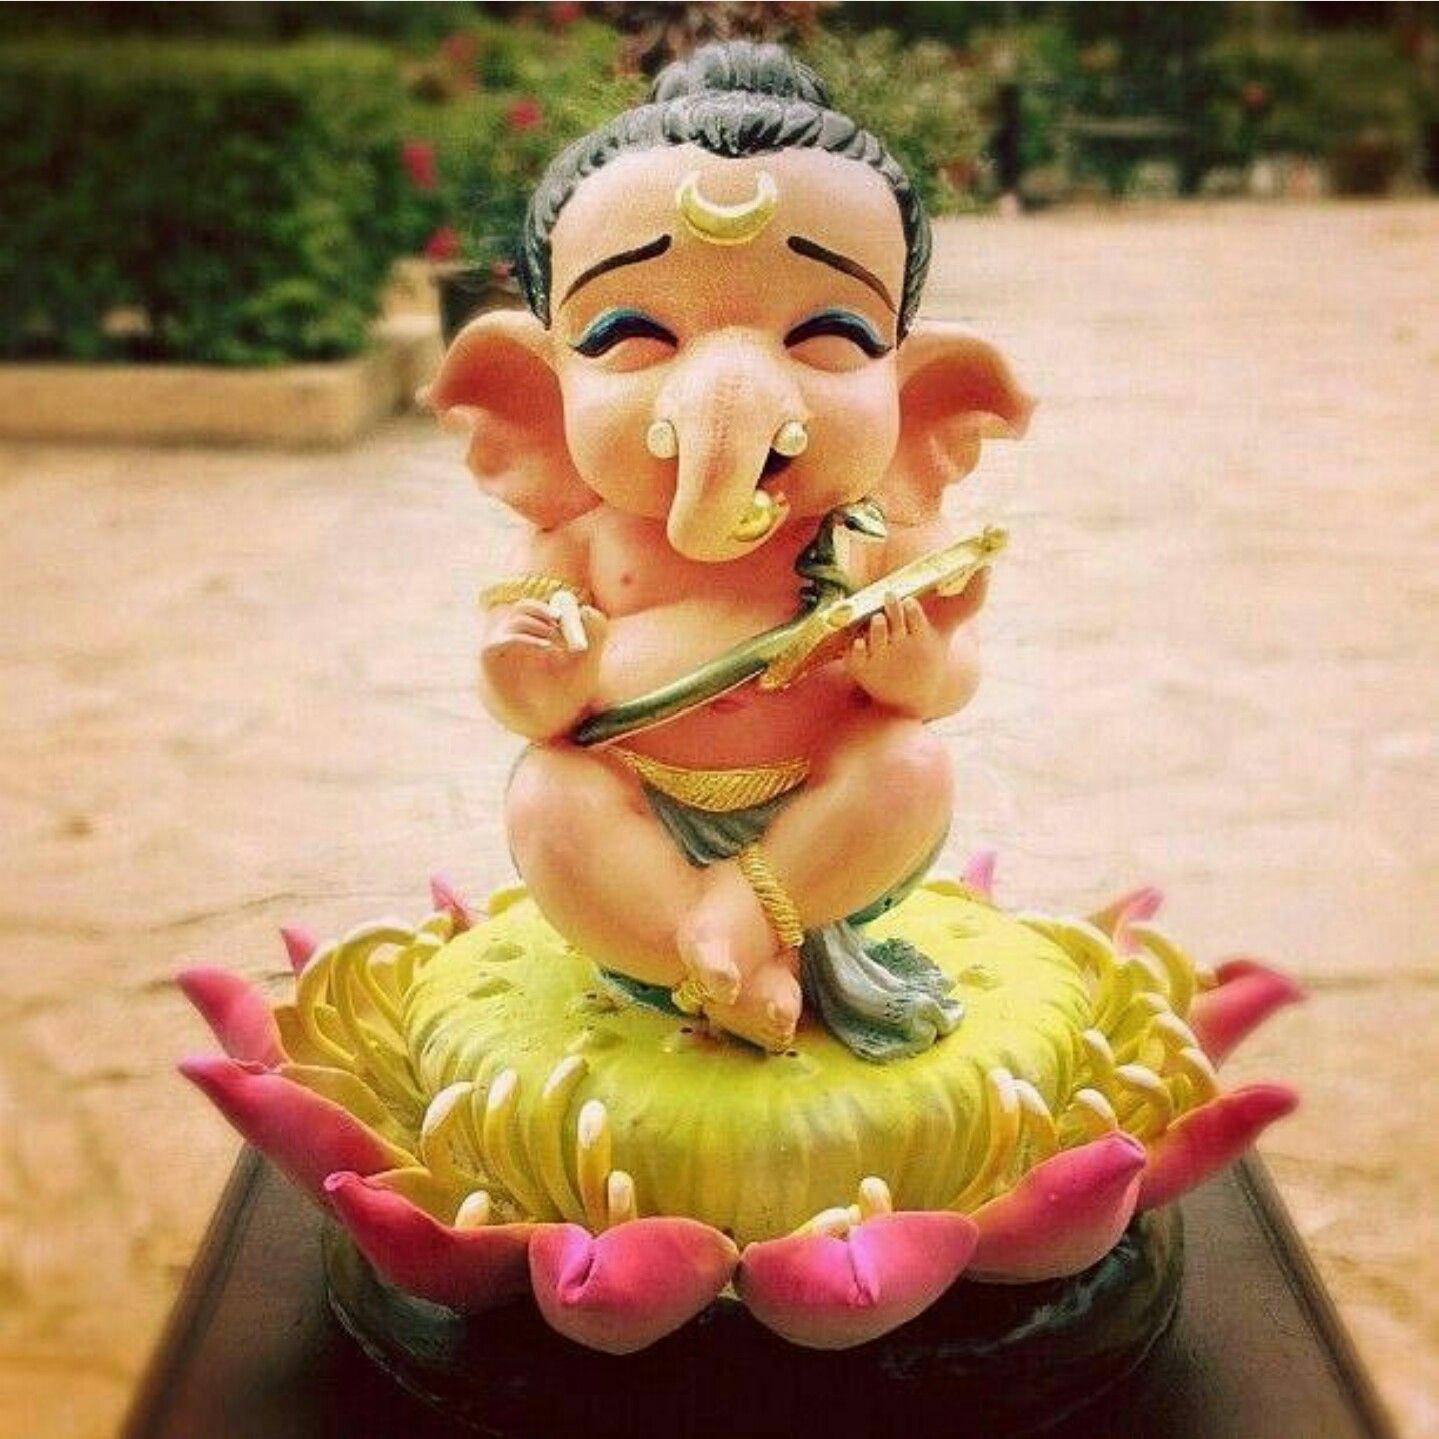 A Fascinating Image Depicts A Baby Statue Of Bal Ganesh Smiling While Sitting On A Lotus Flower Stamen. Background